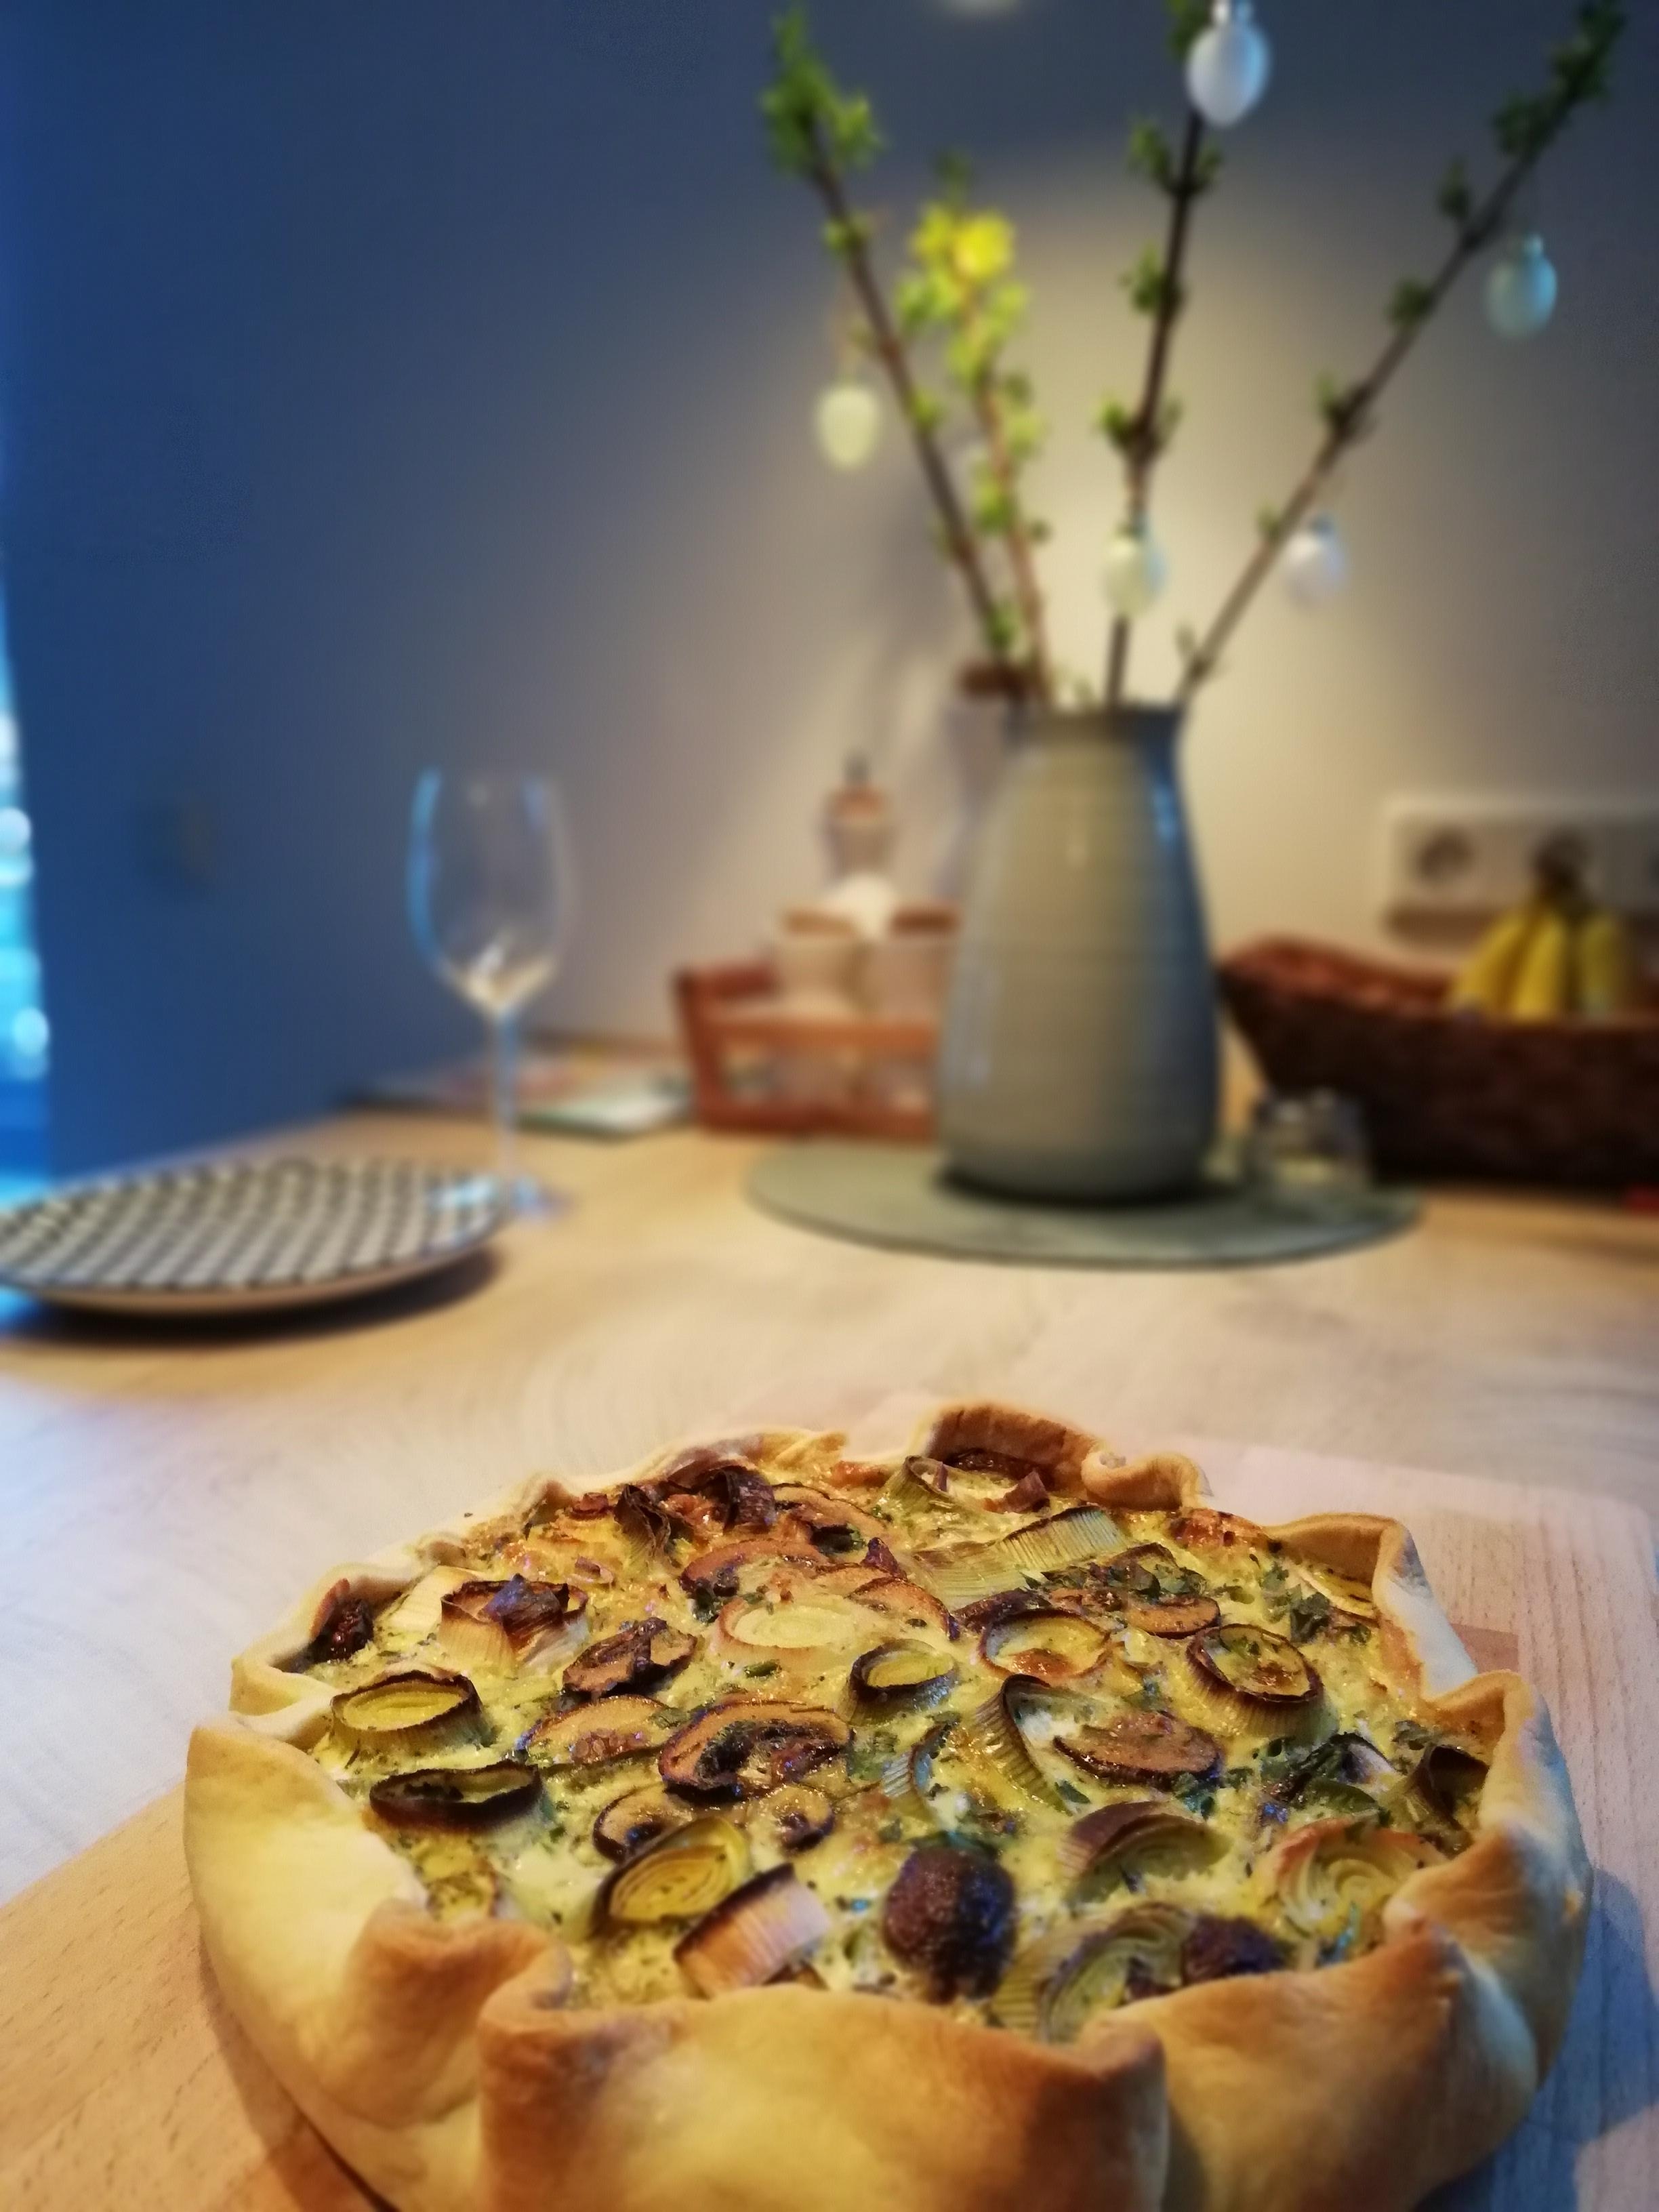 It's quiche time!
#food #couchliebt 